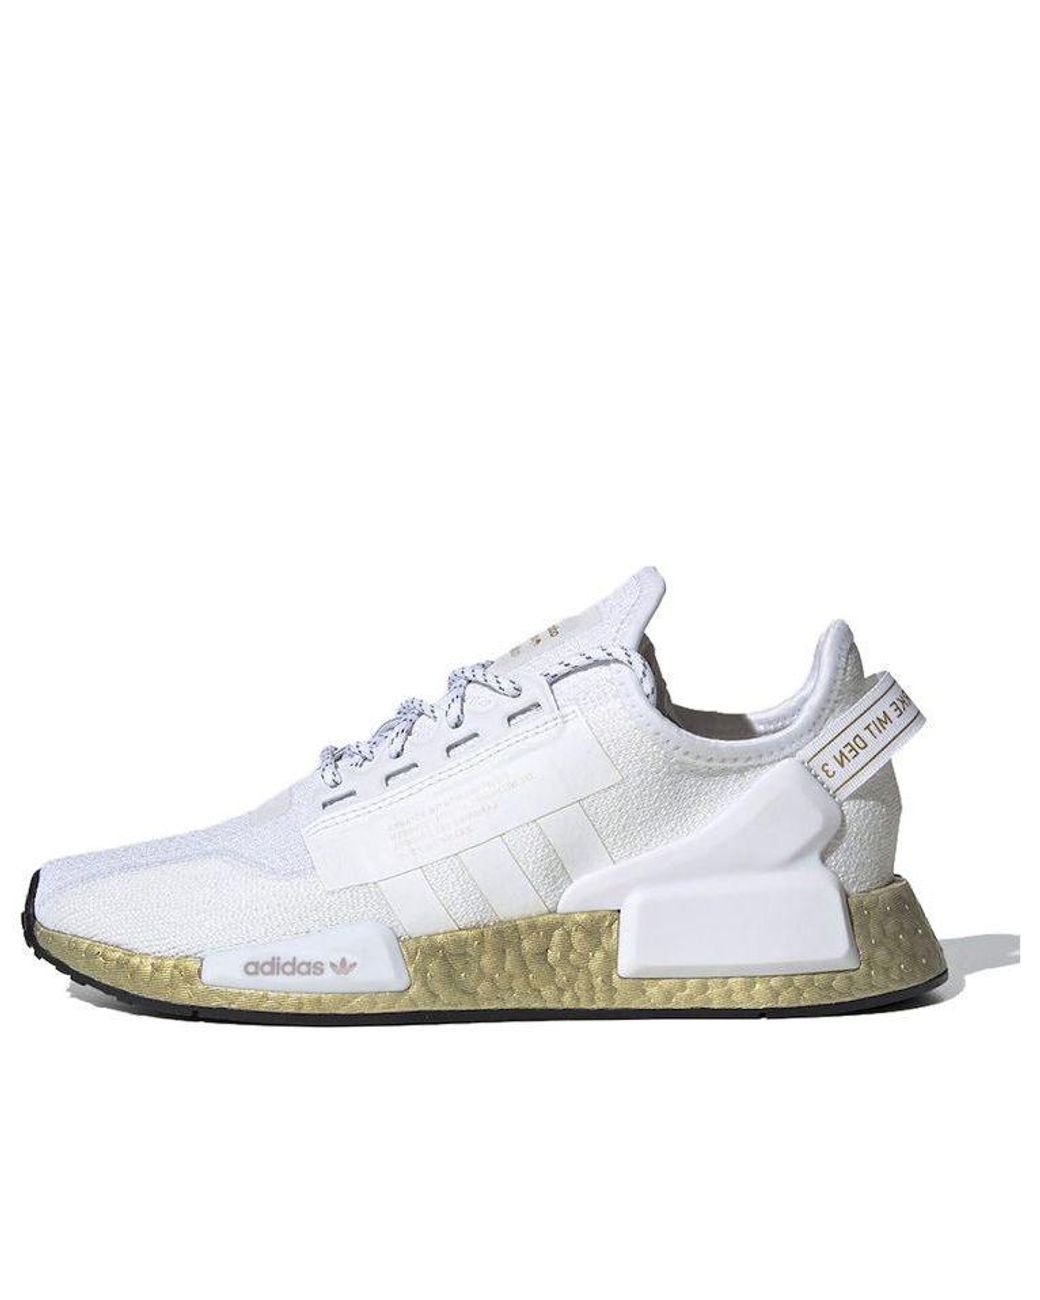 adidas Nmd_r1 V2 'gold Boost' in White | Lyst